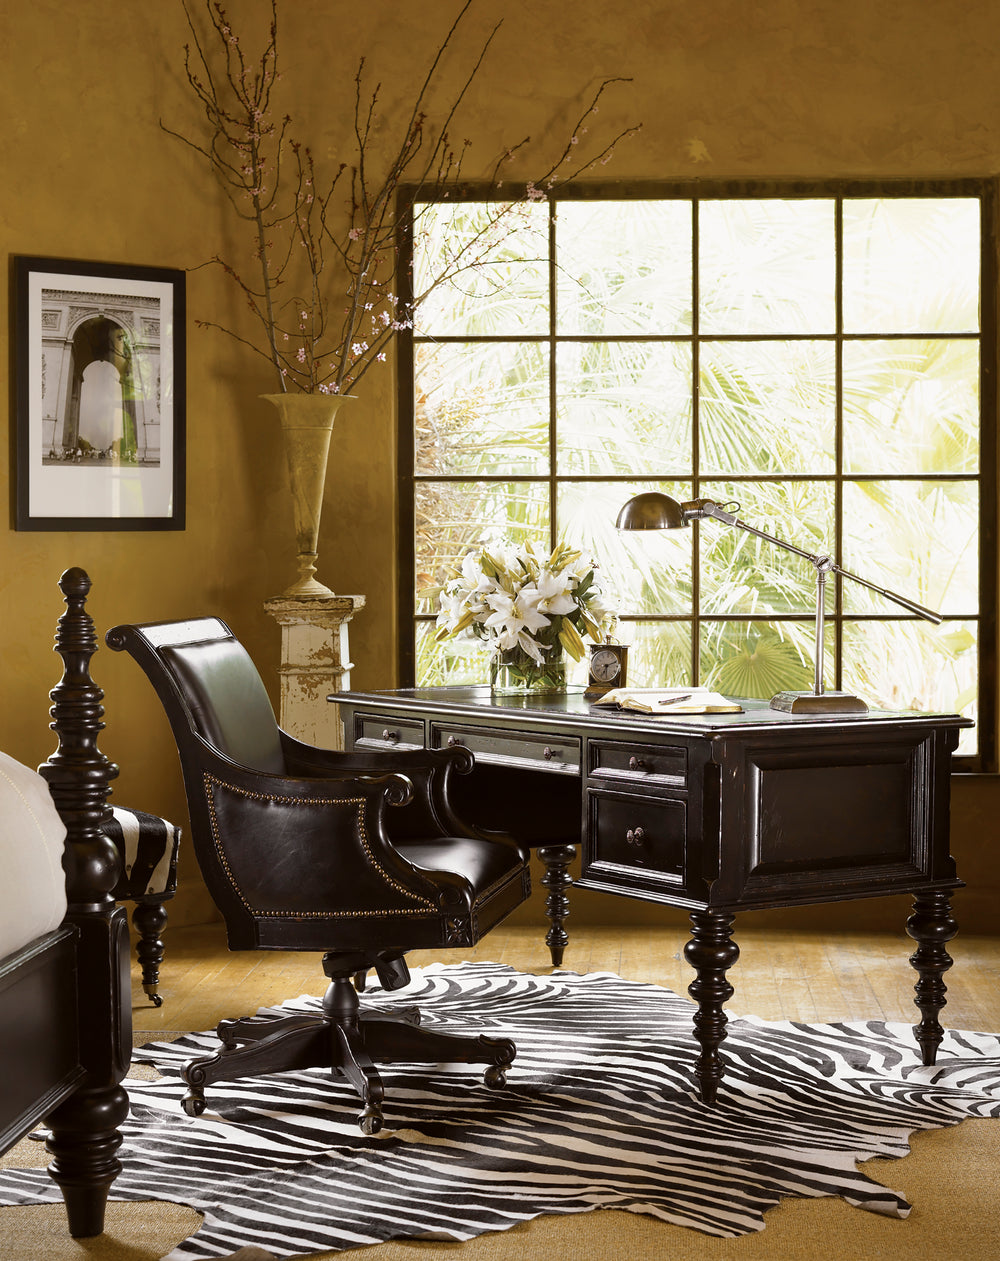 American Home Furniture | Tommy Bahama Home  - Kingstown Admiralty Desk Chair